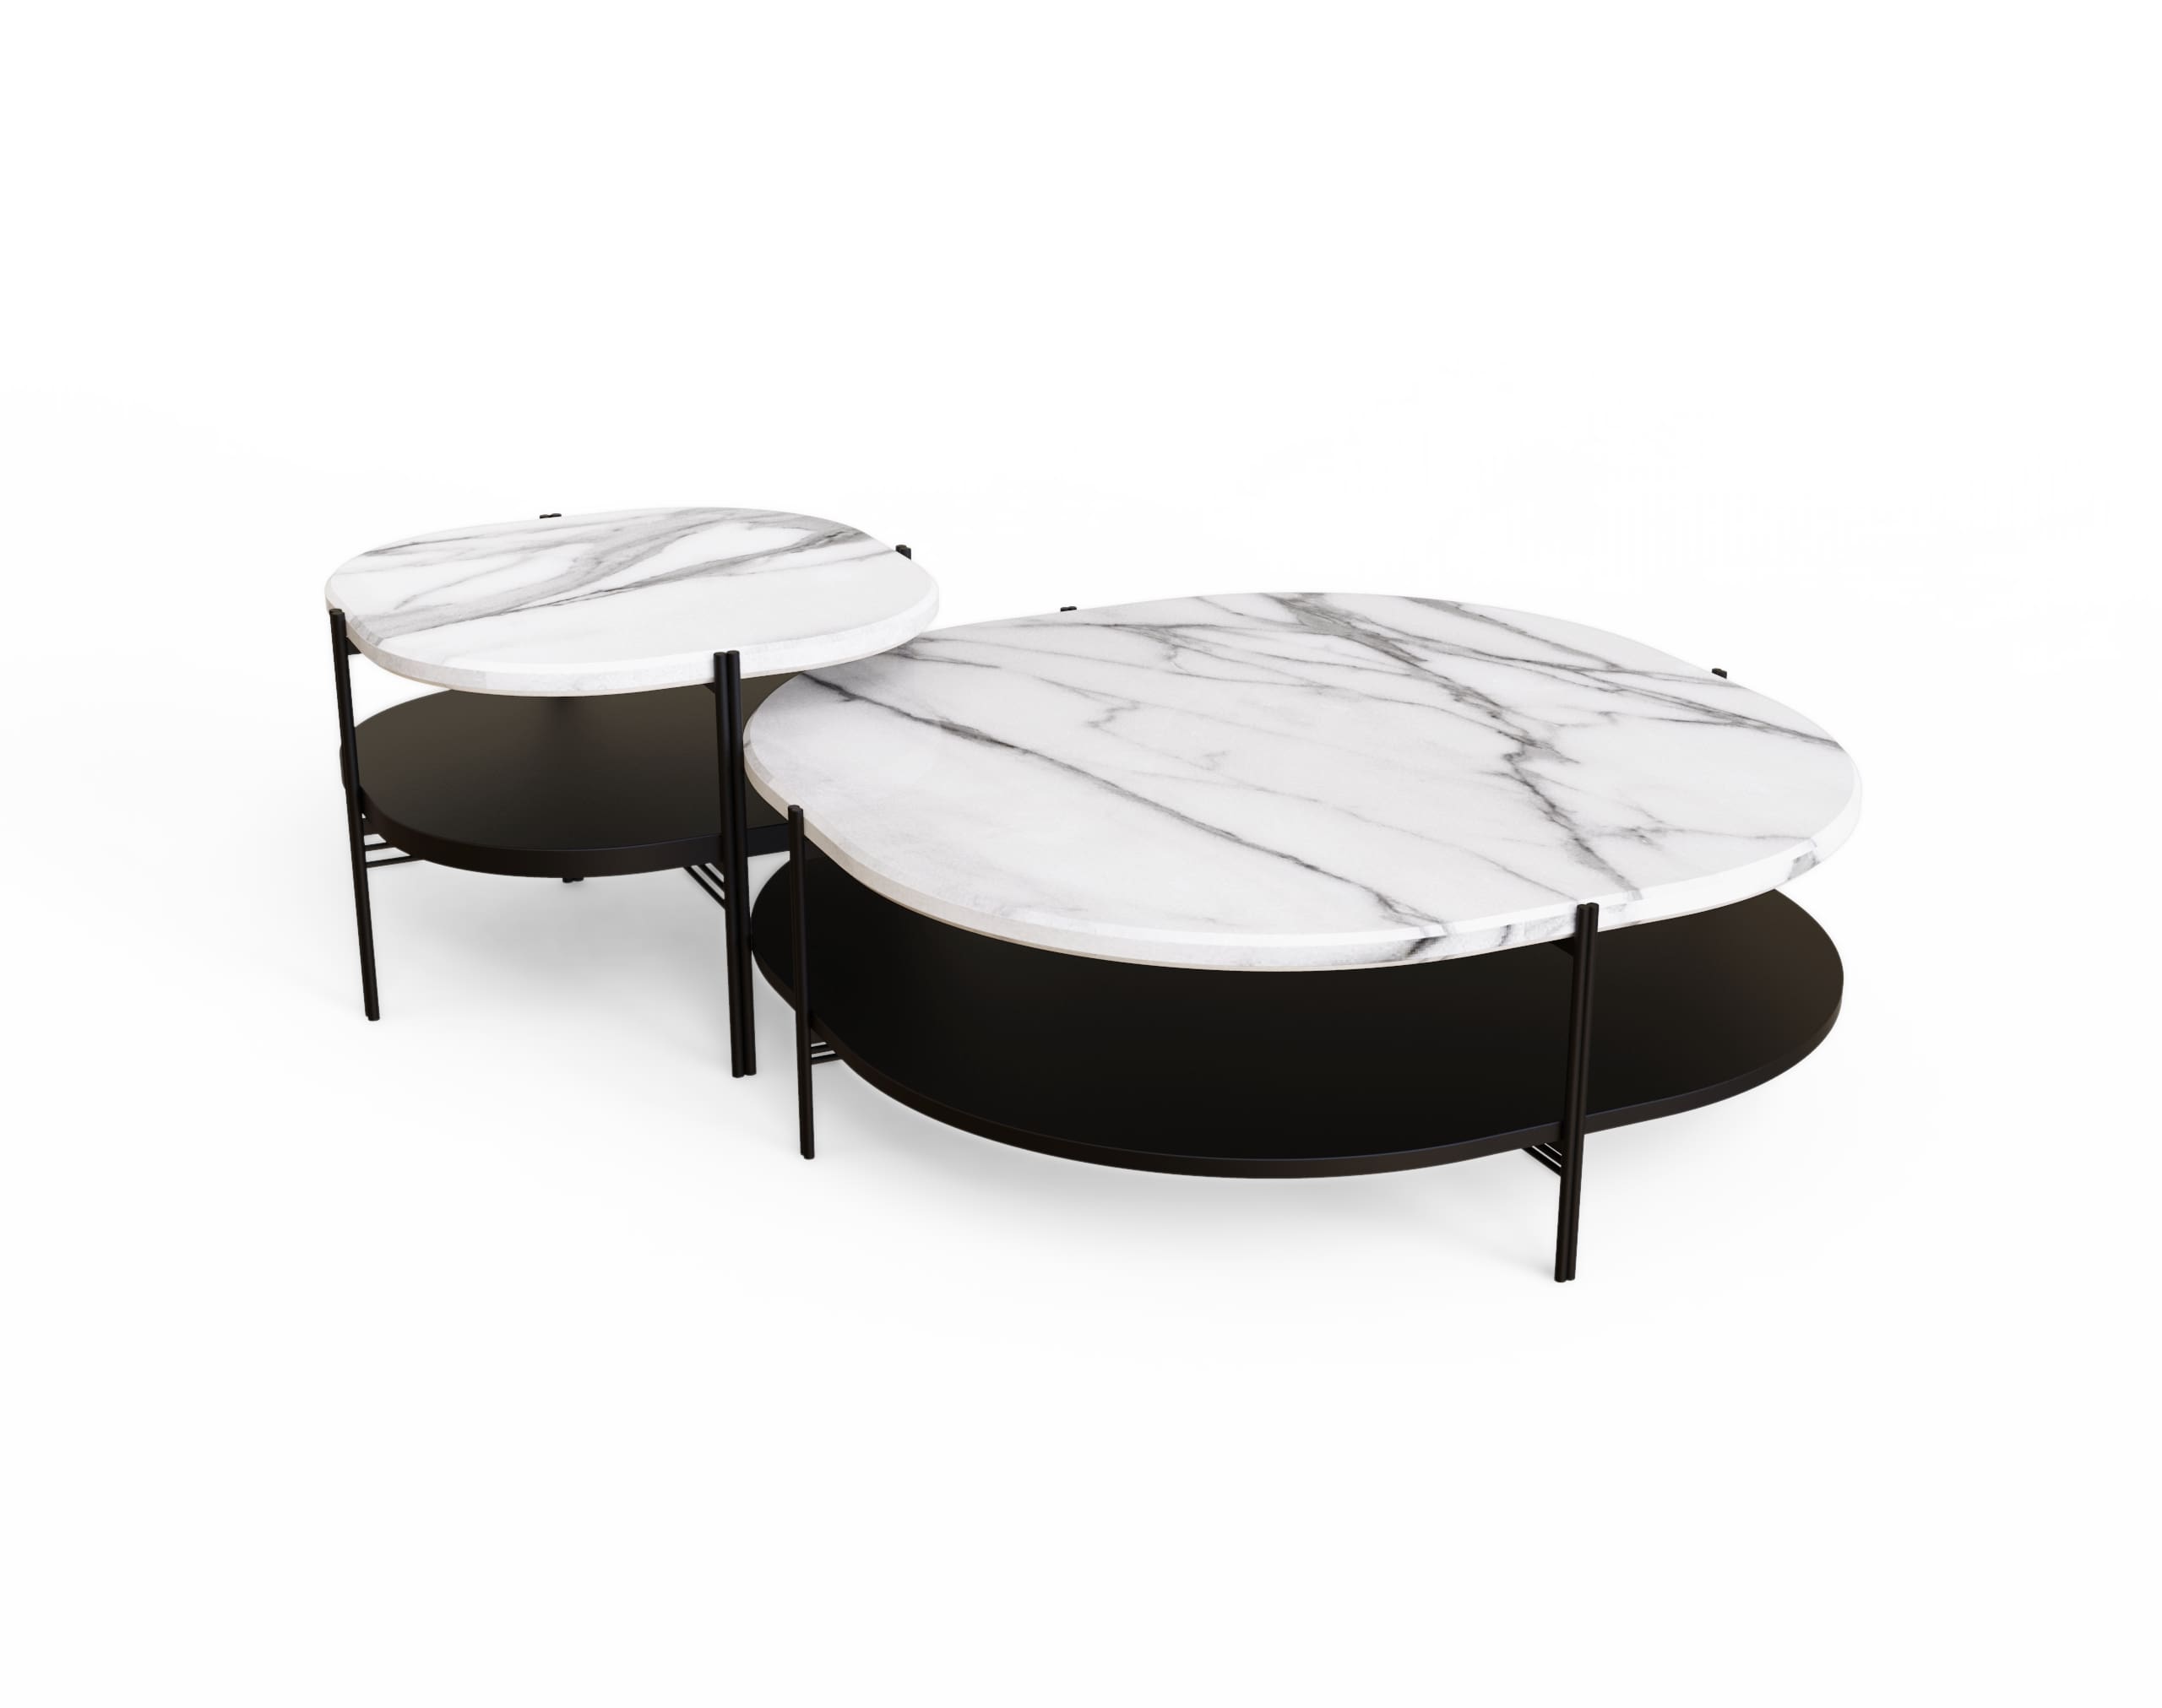 Lurhmann center table a wonderful retro style and strong luxurious presence, the Craig’s are the perfect
statement piece for your living room or lounge space. With an inspiring strong look, this
outstanding piece brings a beautiful modern approach